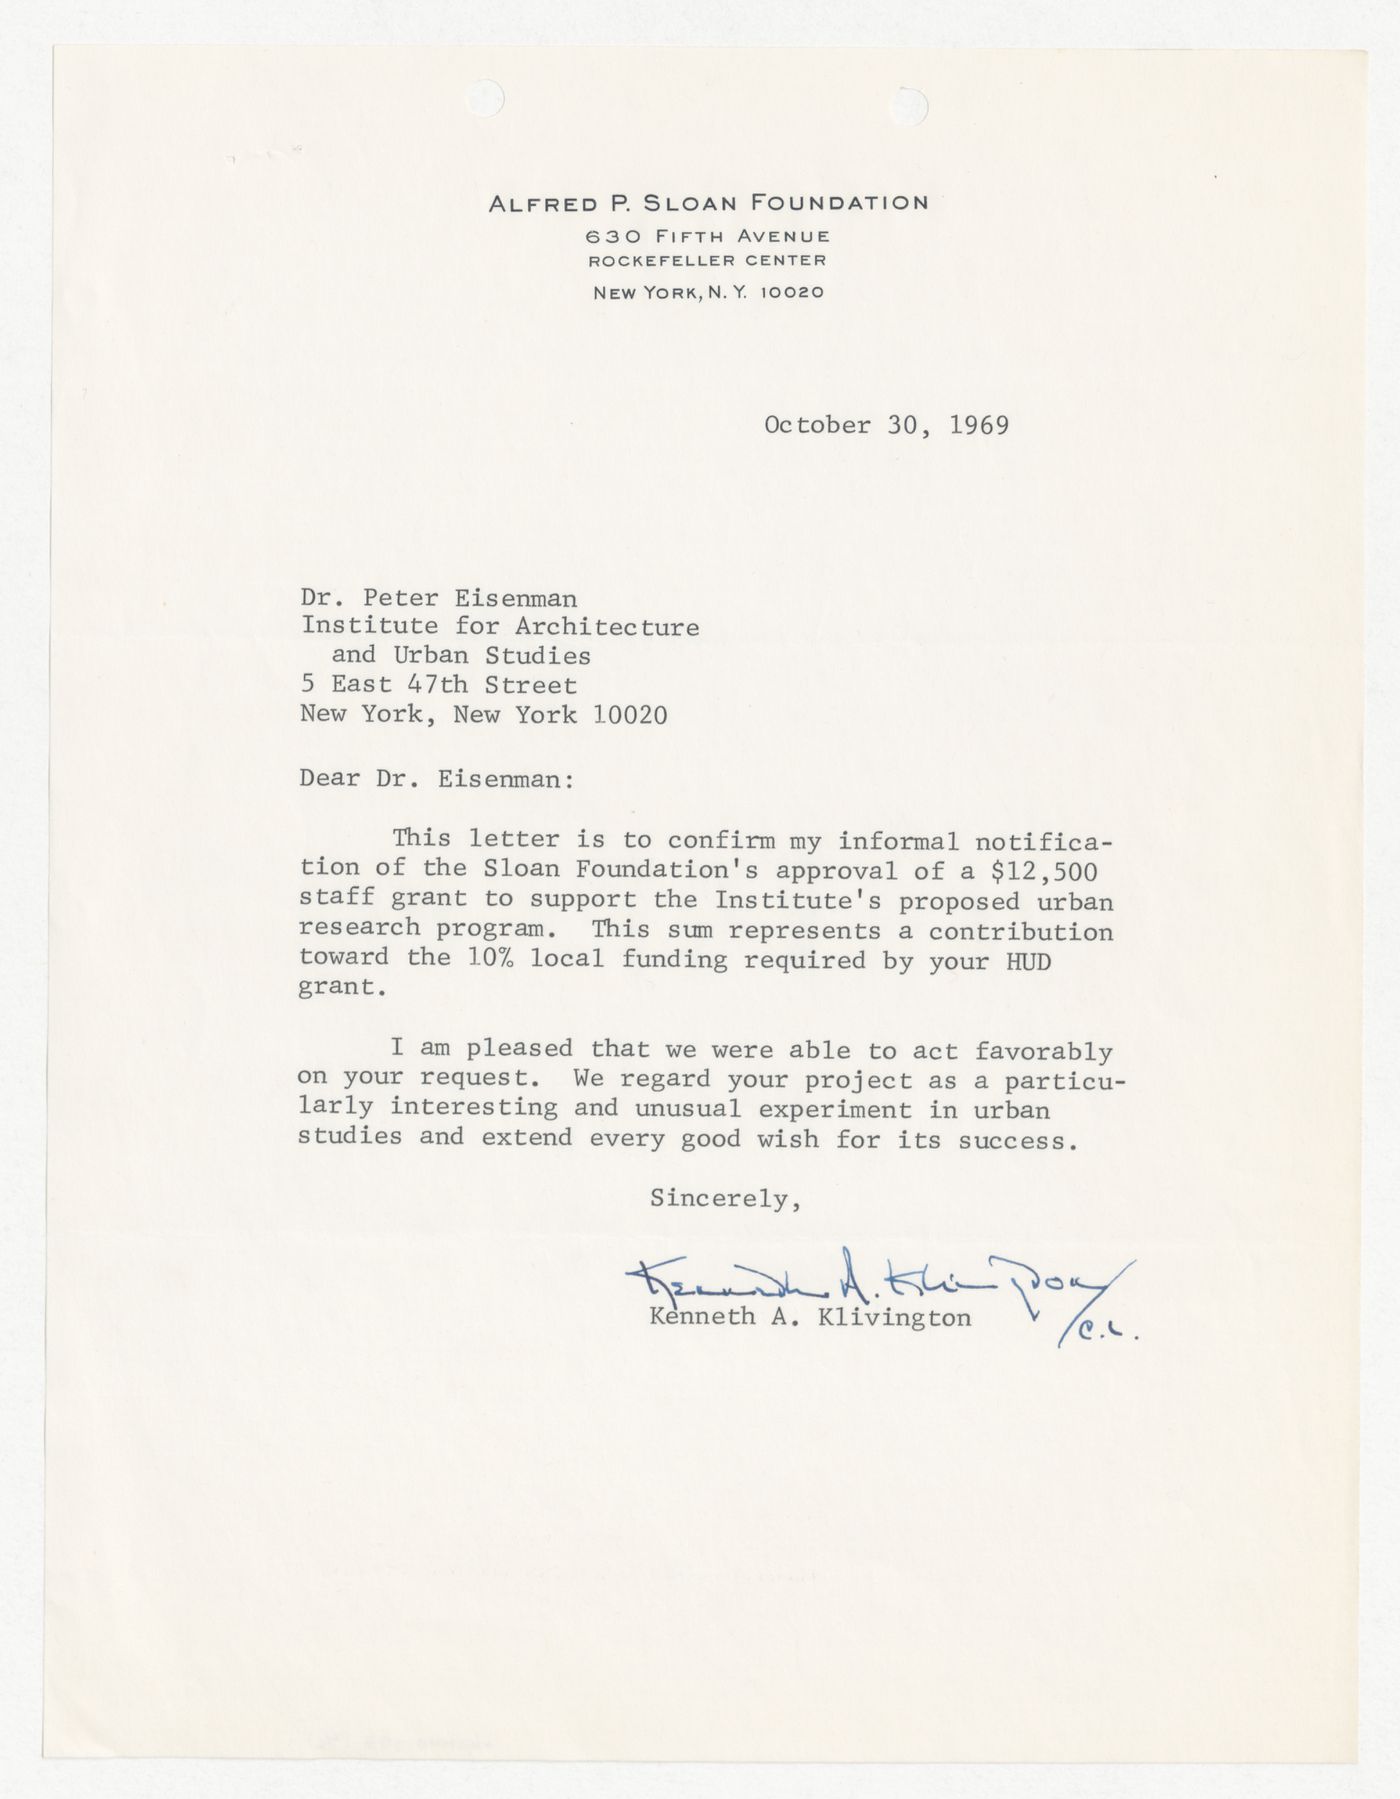 Letter from Peter D. Eisenman to Kenneth A. Klivington thanking the Alfred P. Sloan Foundation for their support of The Street research project with attached letter from Kenneth A. Klivington